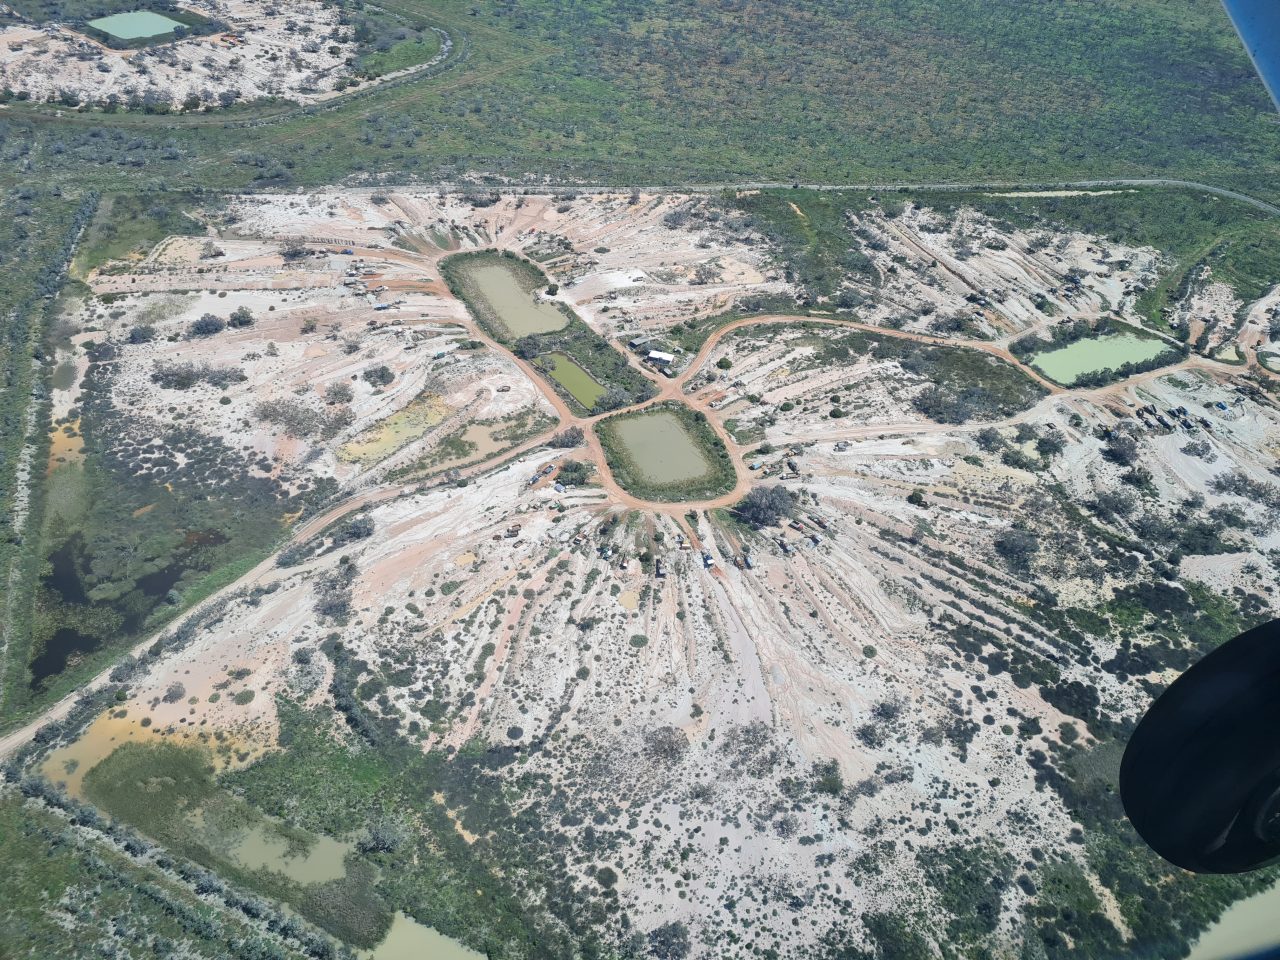 Aerial photo of cleared land surrounding rectangular dams with green water. Trucks parked in a ring around the dams with many dirt roads running from the dams out to the edge of the cleared areas. 